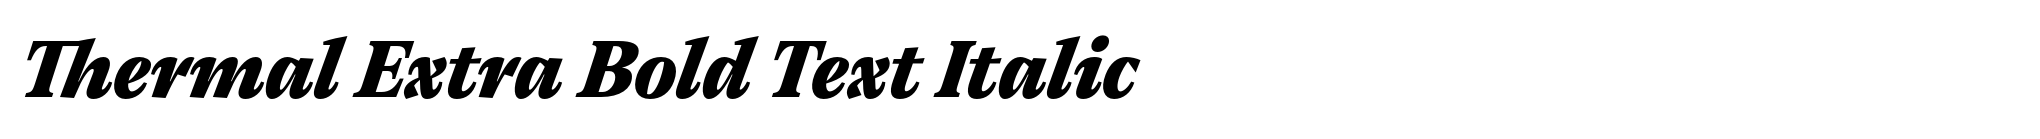 Thermal Extra Bold Text Italic image